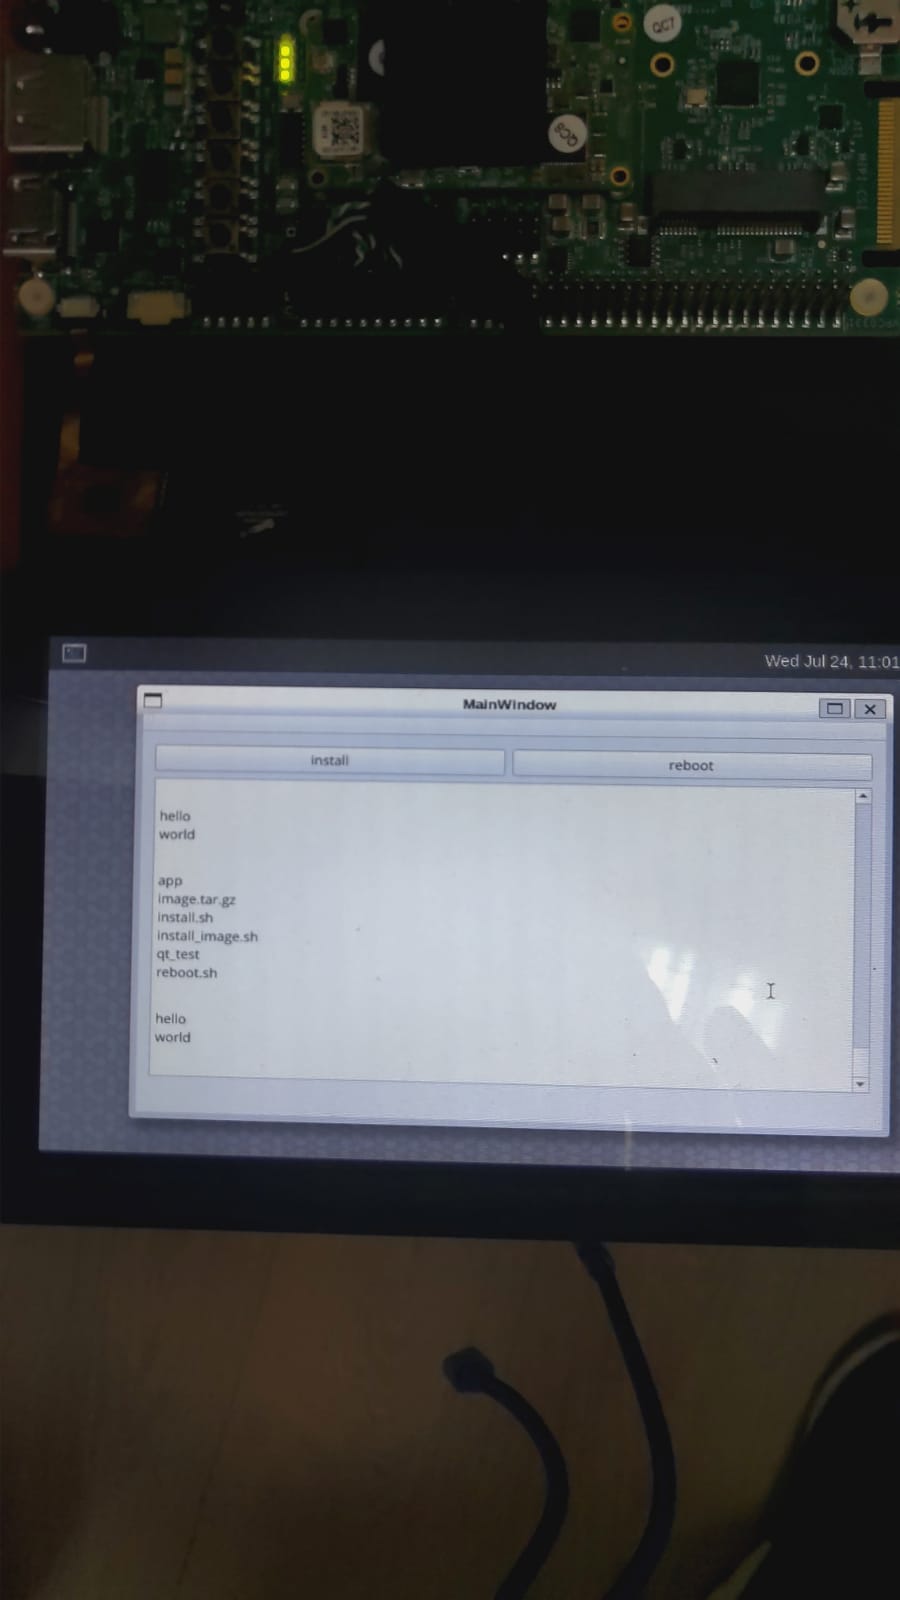 Demo of embedded QT5 application on touch screen